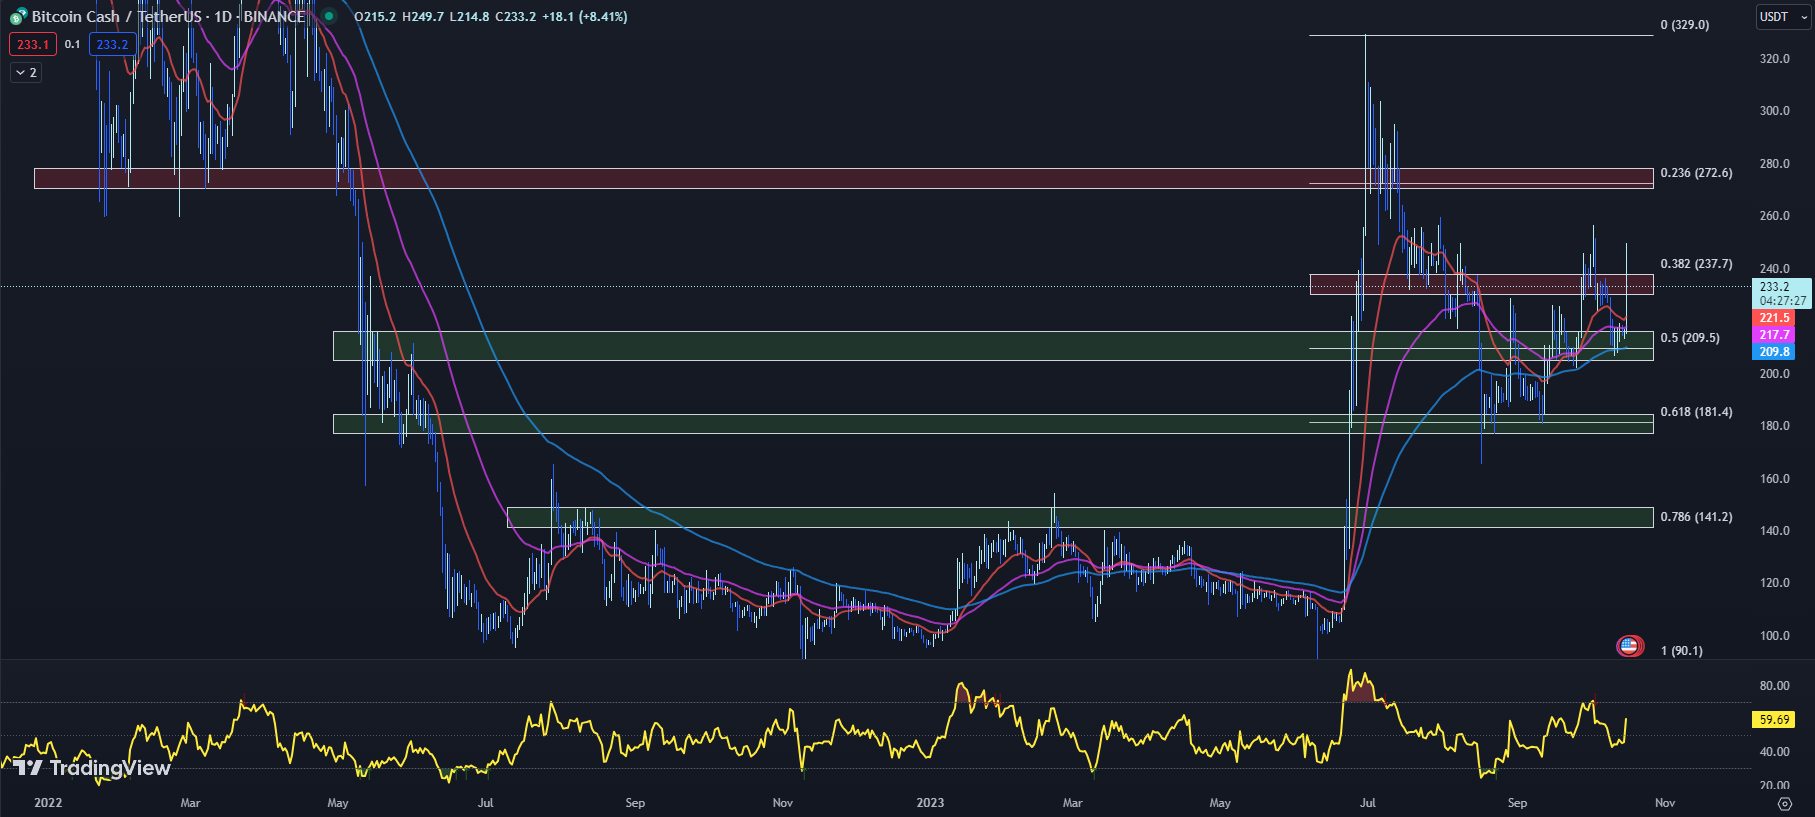 TradingView chart for the BCH price 10-16-23